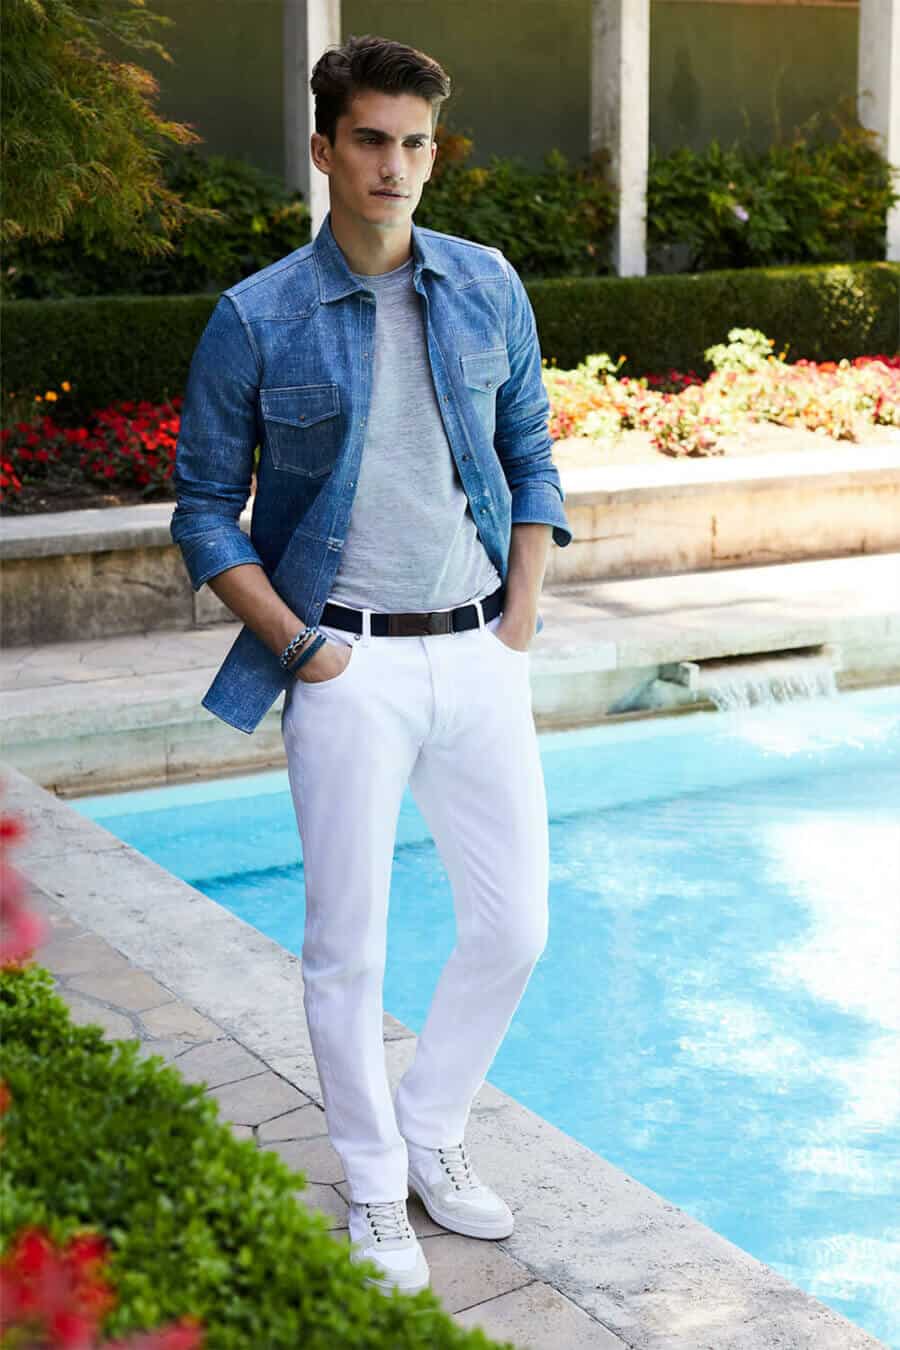 A man standing wearing white jeans.